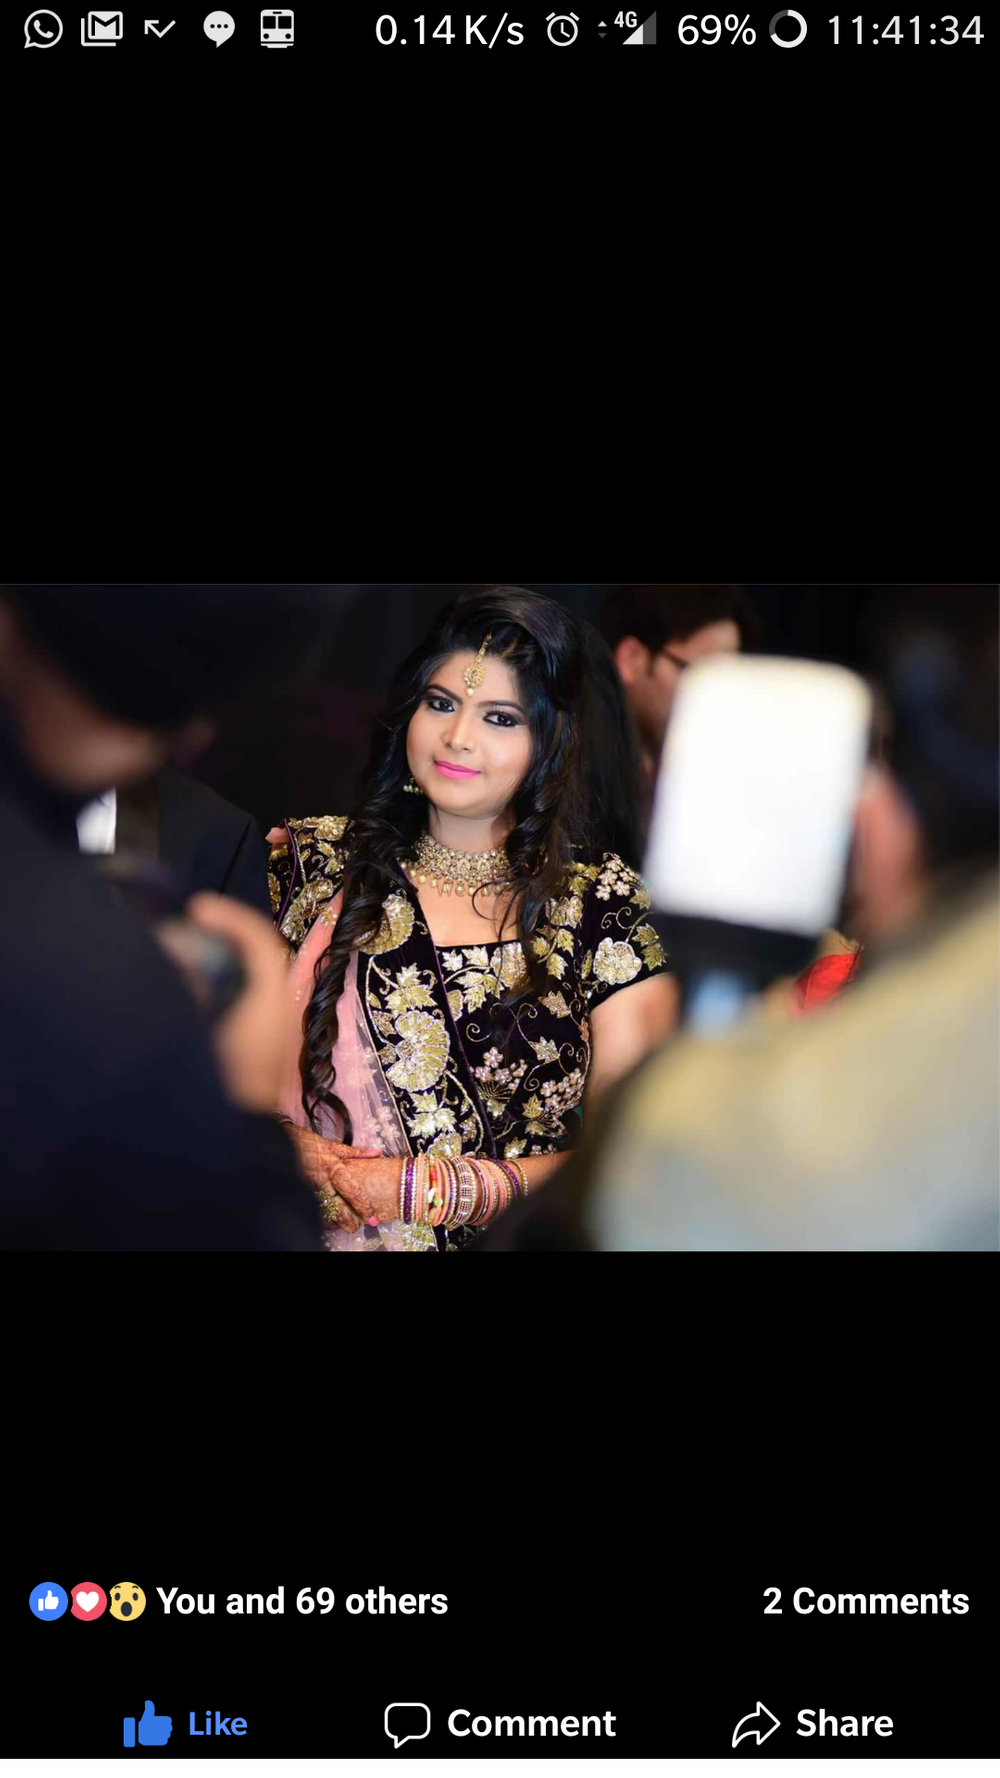 Photo From Makeover magic - By Makeup FX by Reshu Nagpal